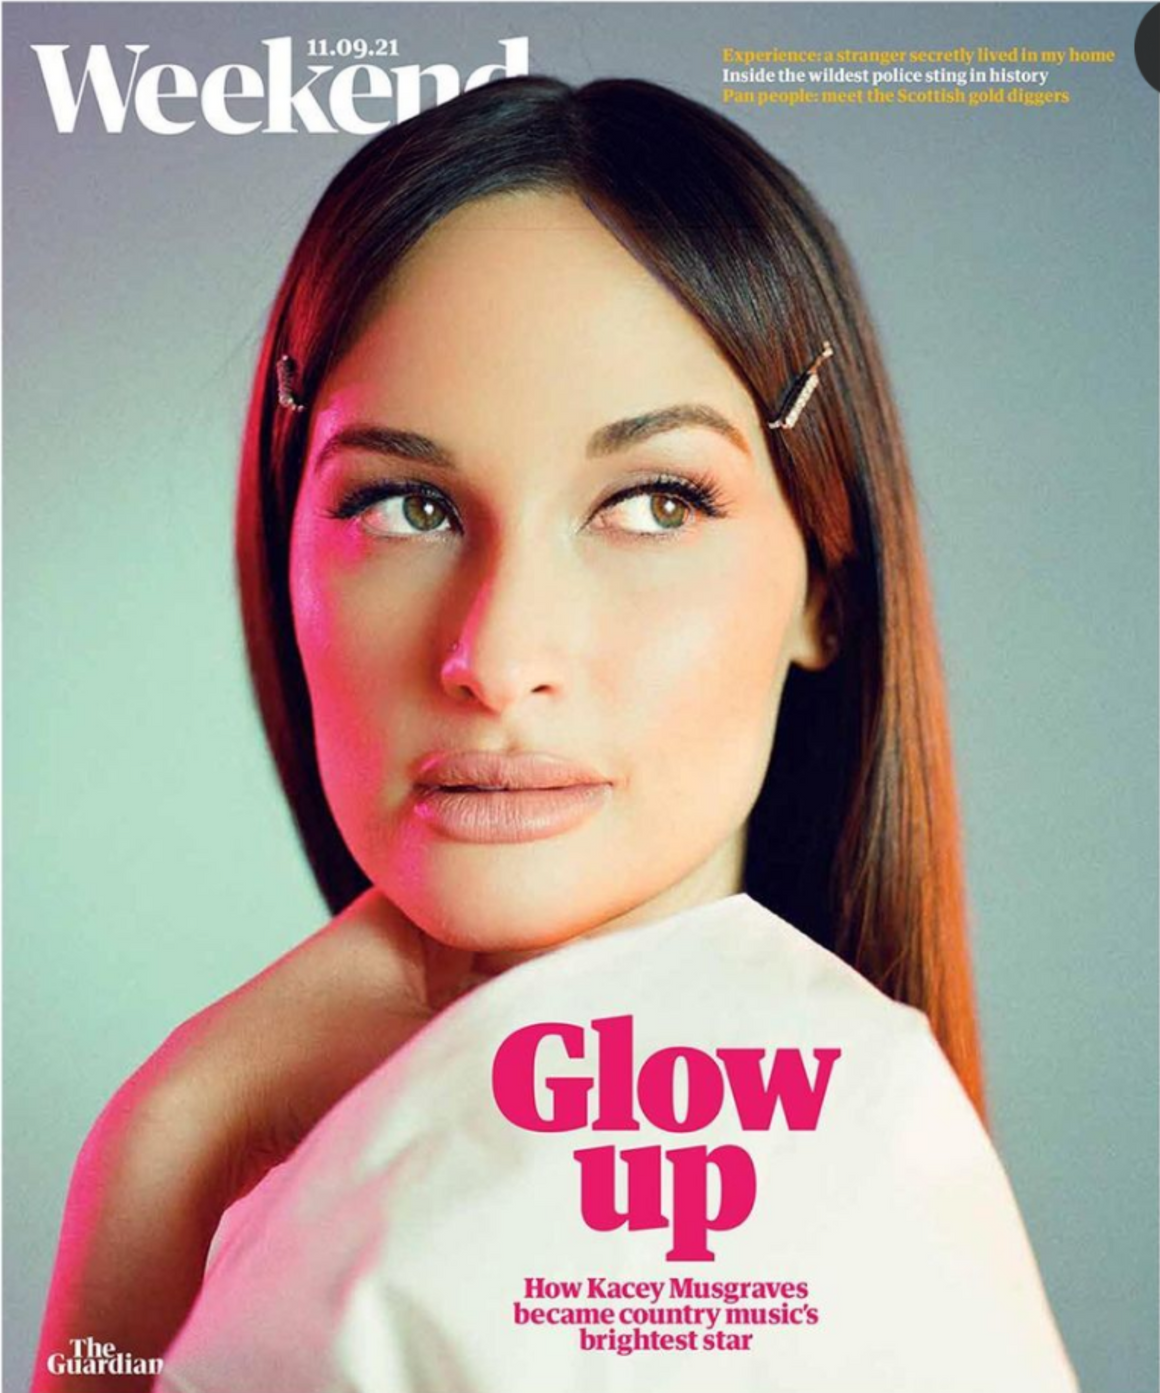 GUARDIAN WEEKEND Mag 11/09/2021 KACEY MUSGRAVES COVER